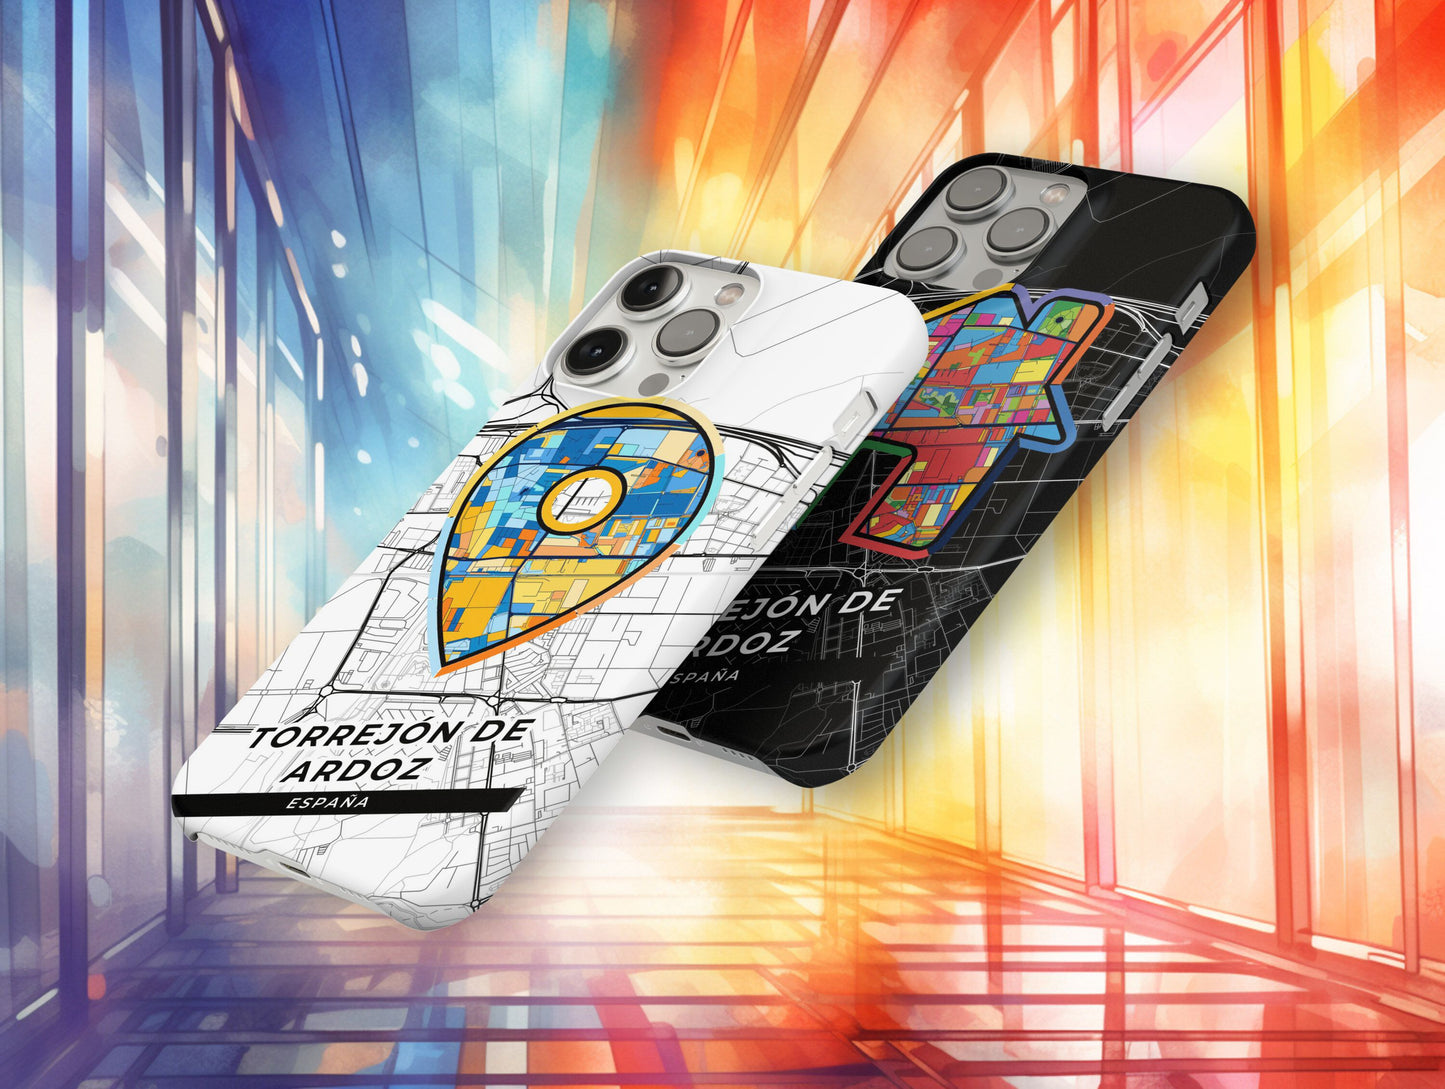 Torrejón De Ardoz Spain slim phone case with colorful icon. Birthday, wedding or housewarming gift. Couple match cases.